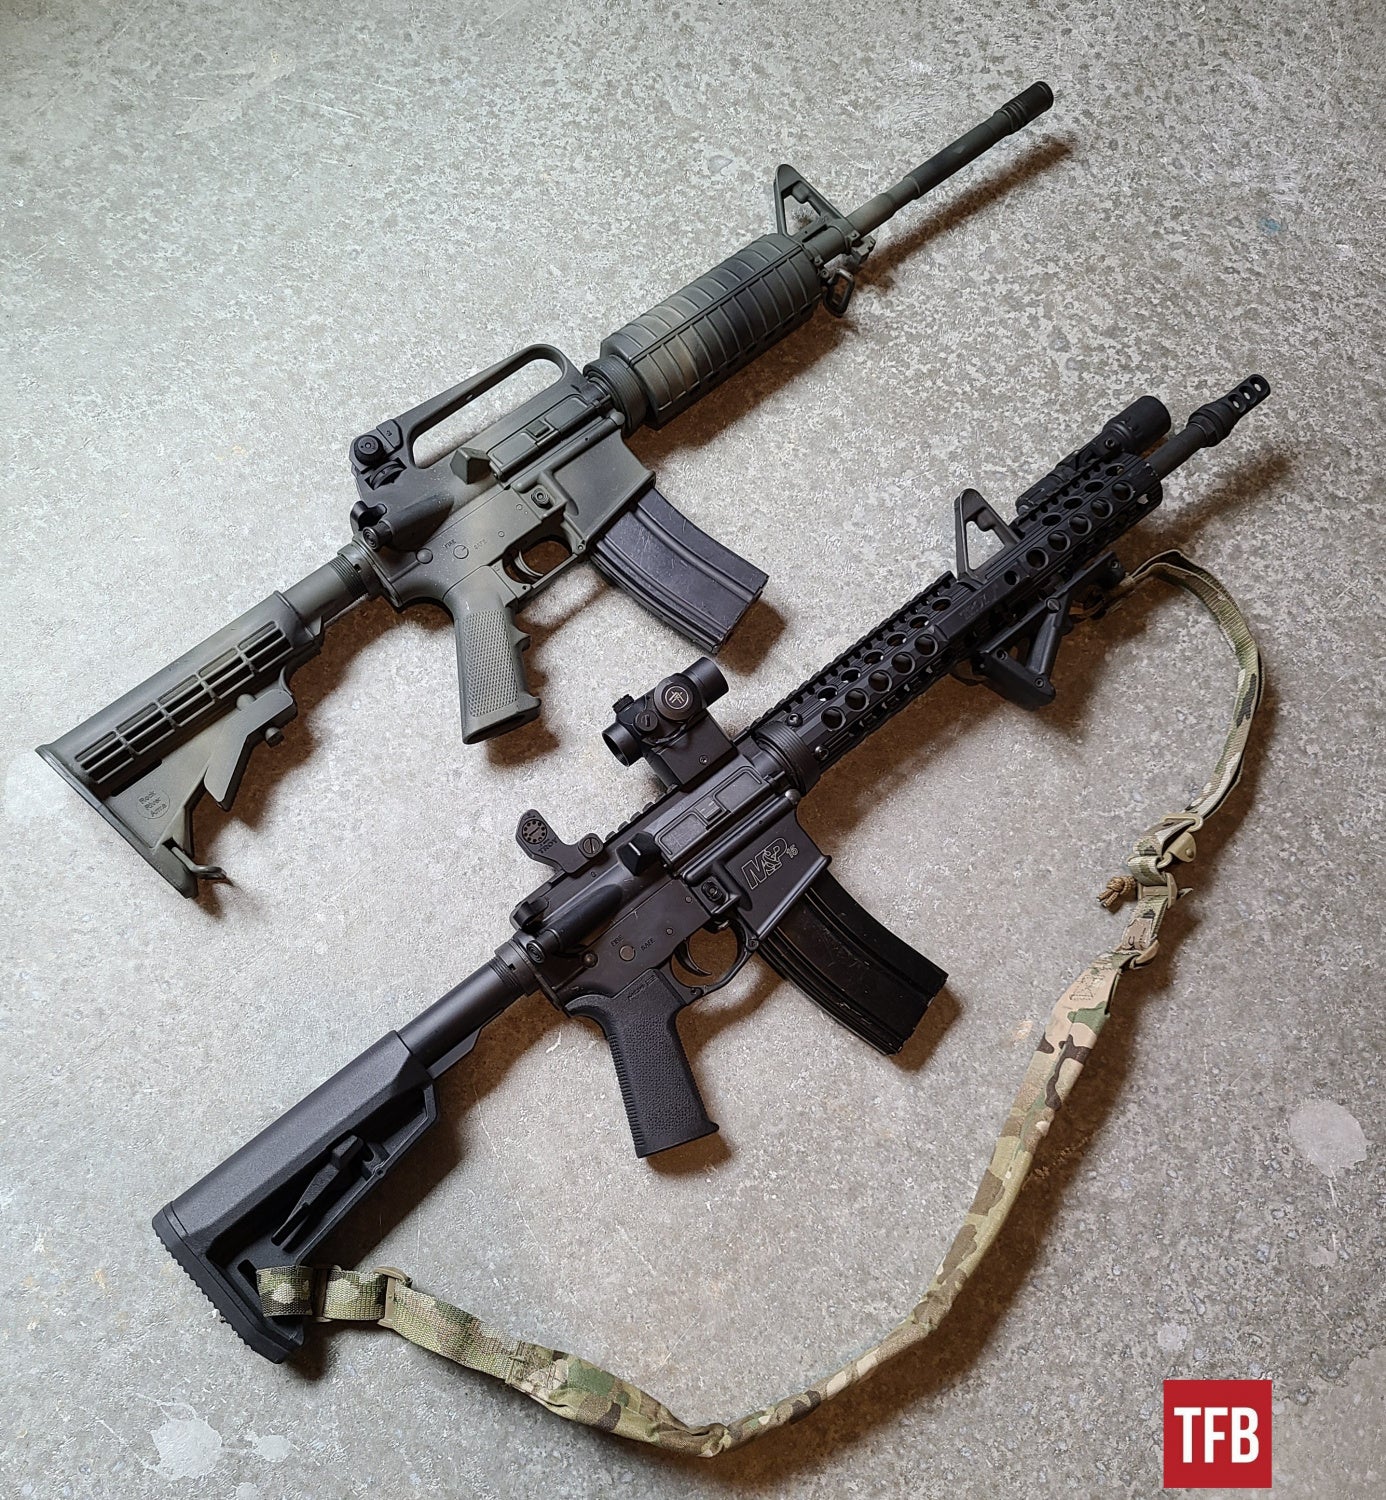 East Meets West - The 5.45x39mm AR-15